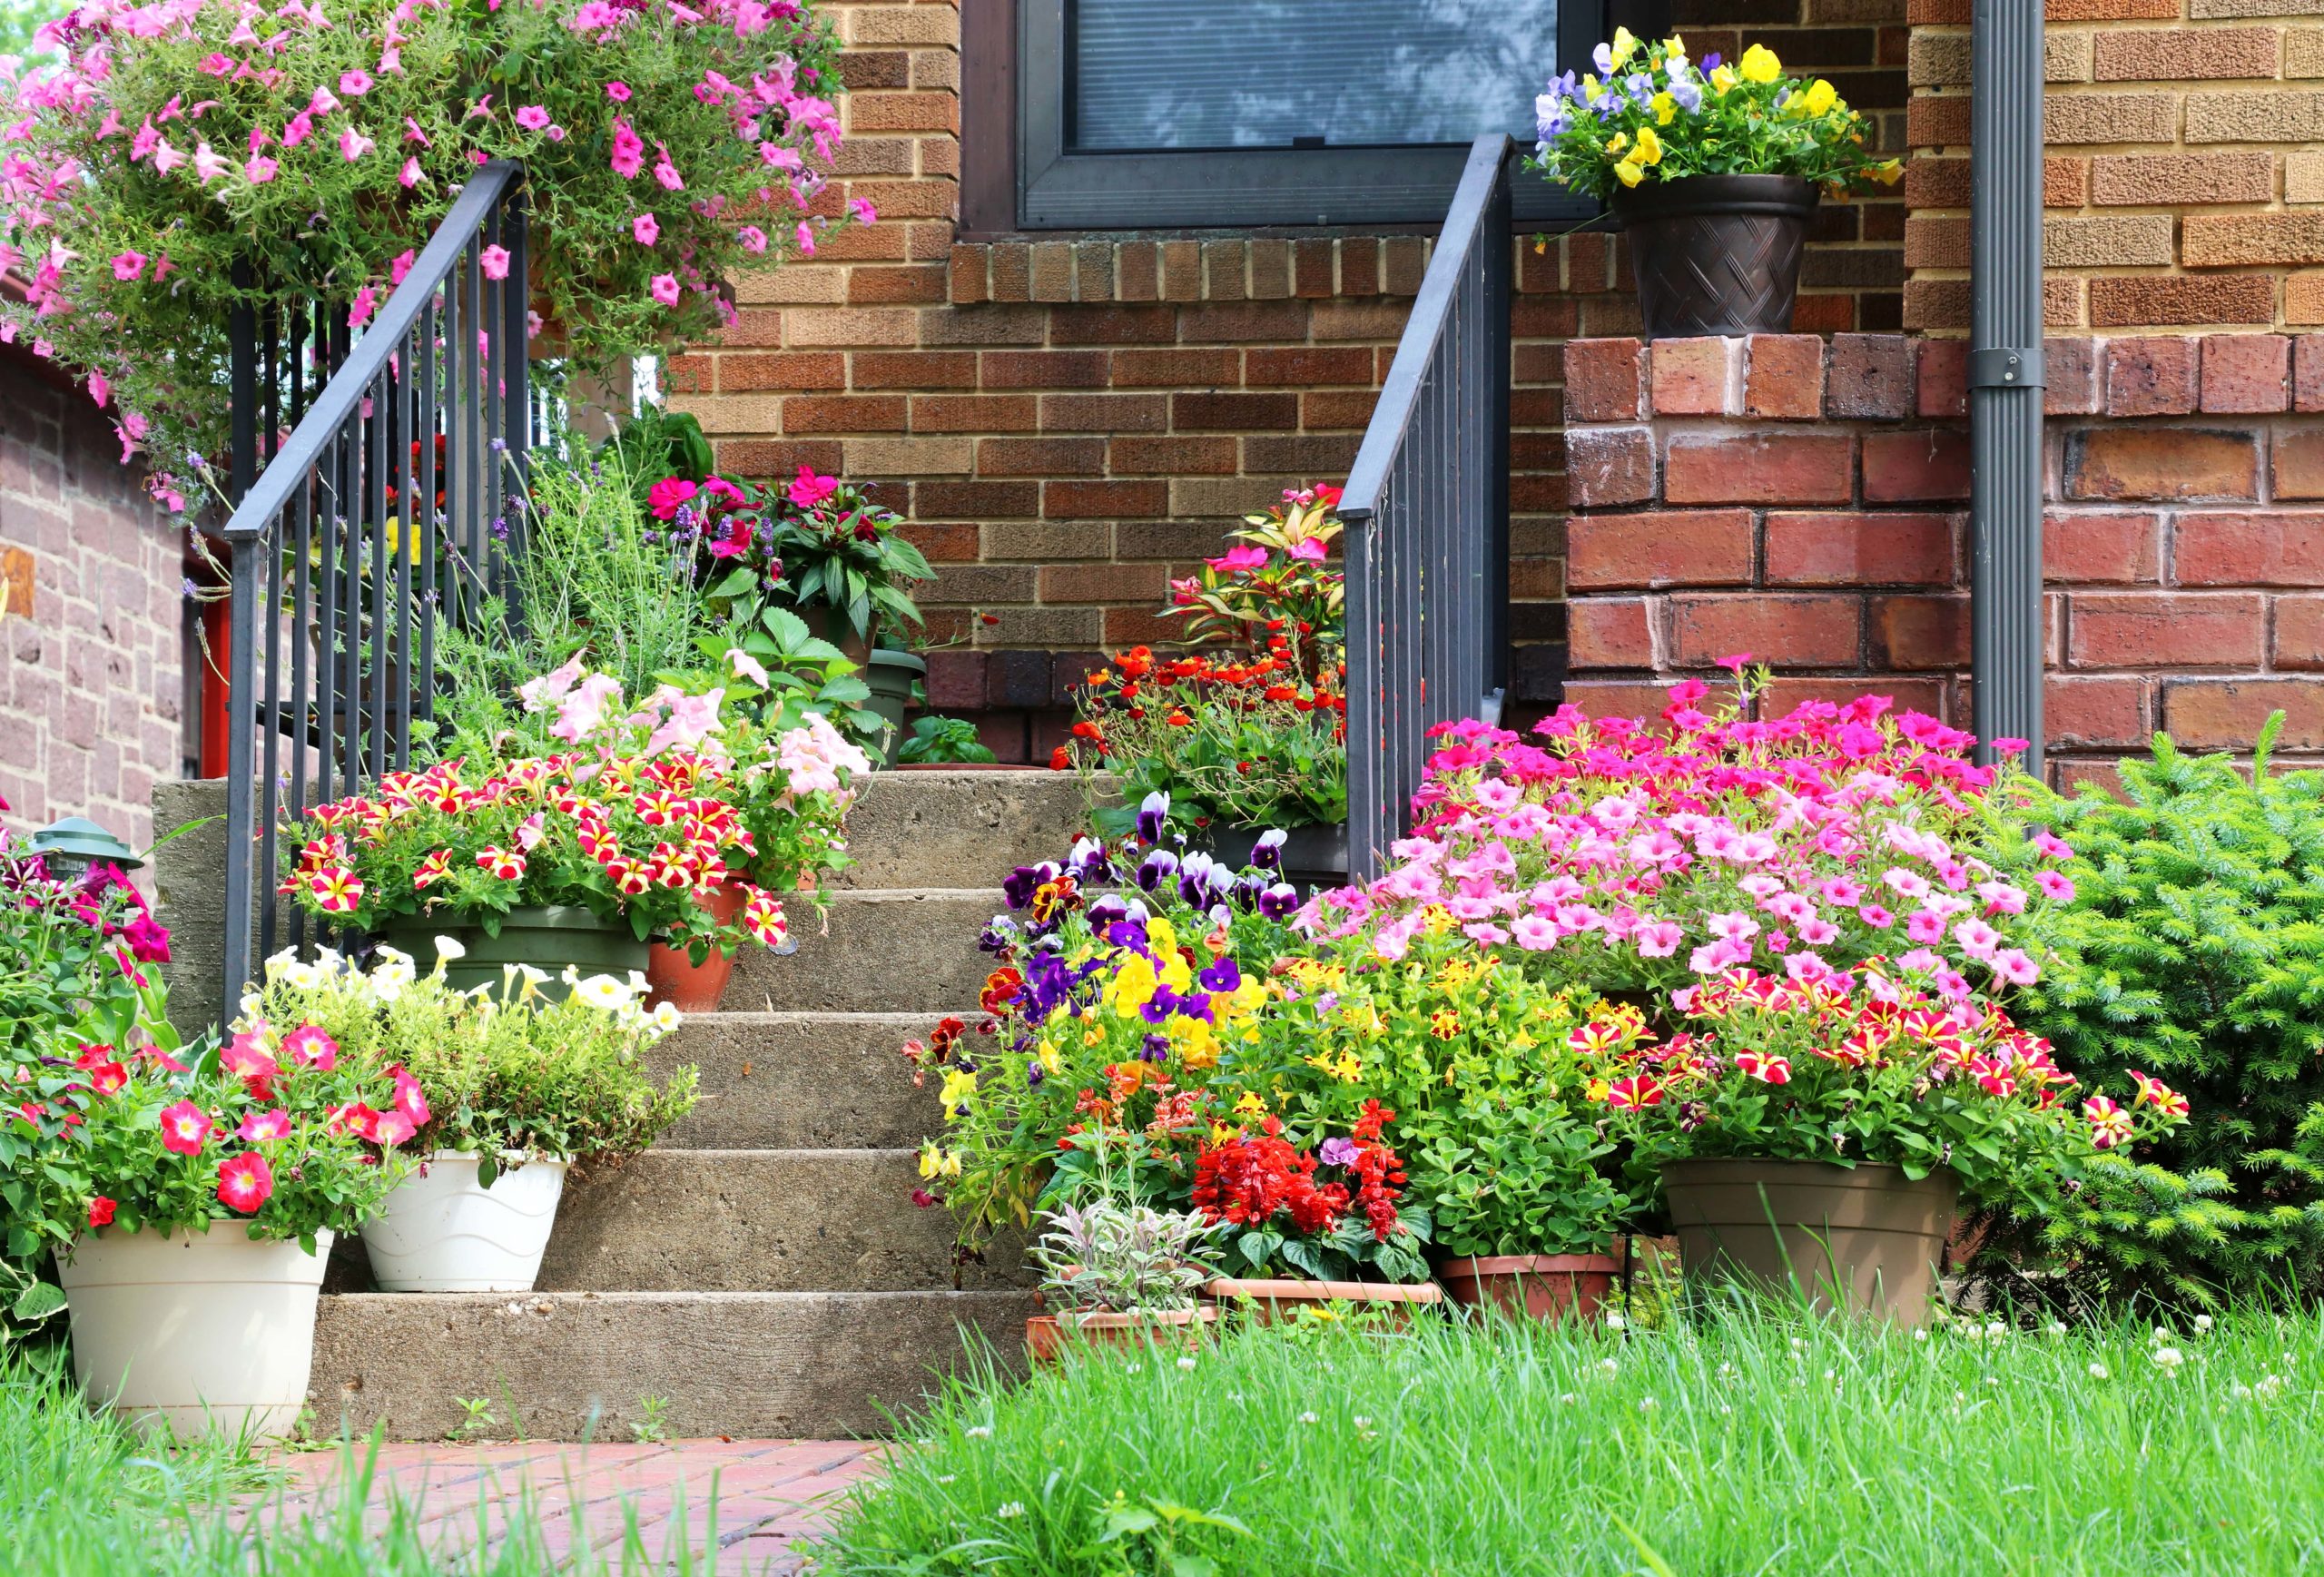 Residential property with flowers on porch steps